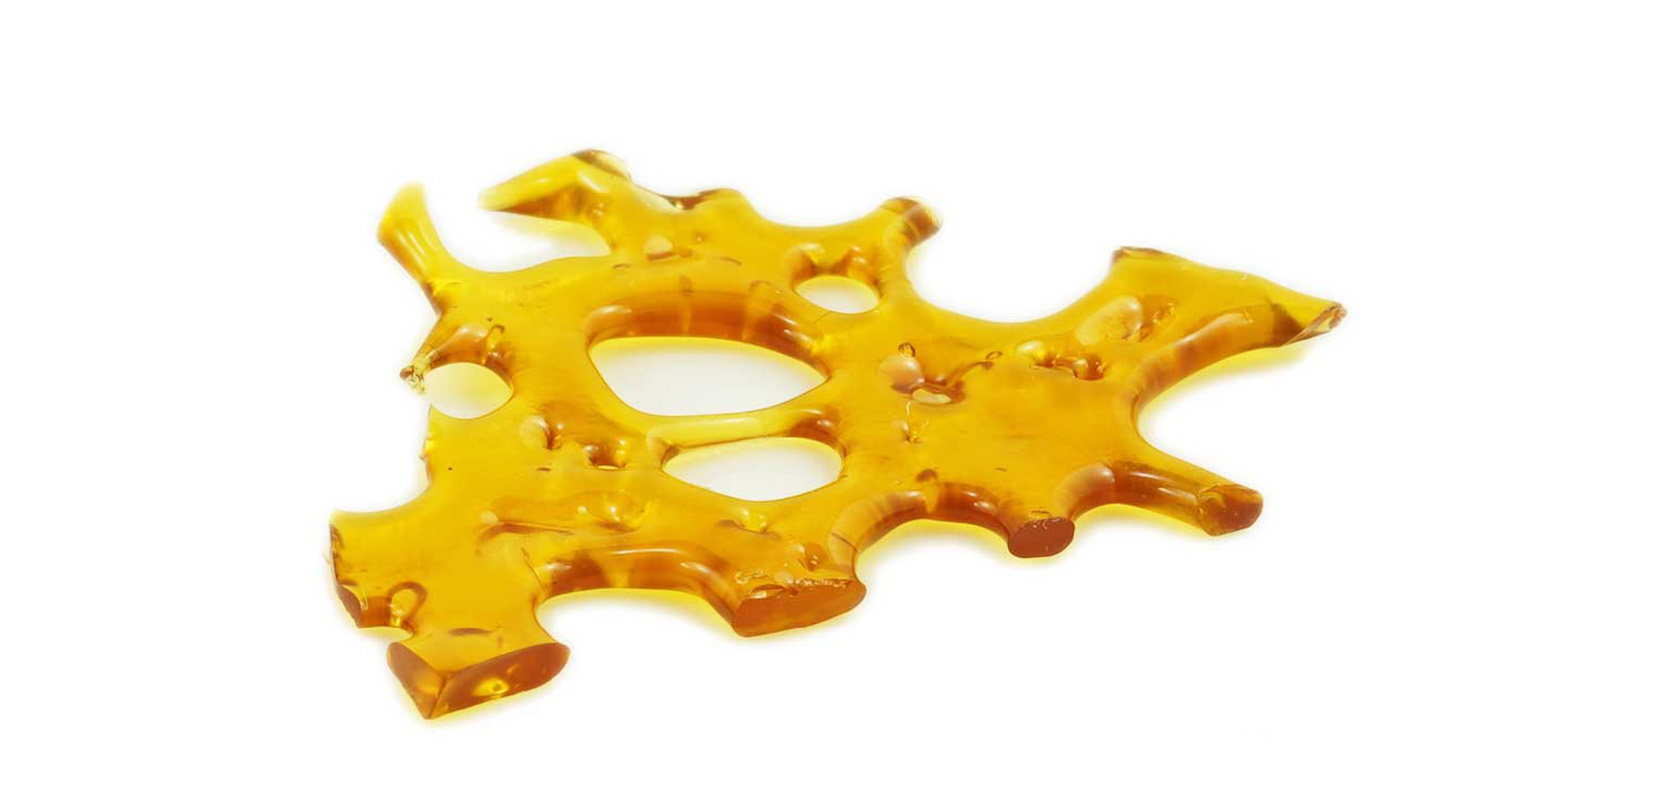 shatter concentrate dab drug from wccannabis online dispensary canada to buy weed online. hash vs shatter.